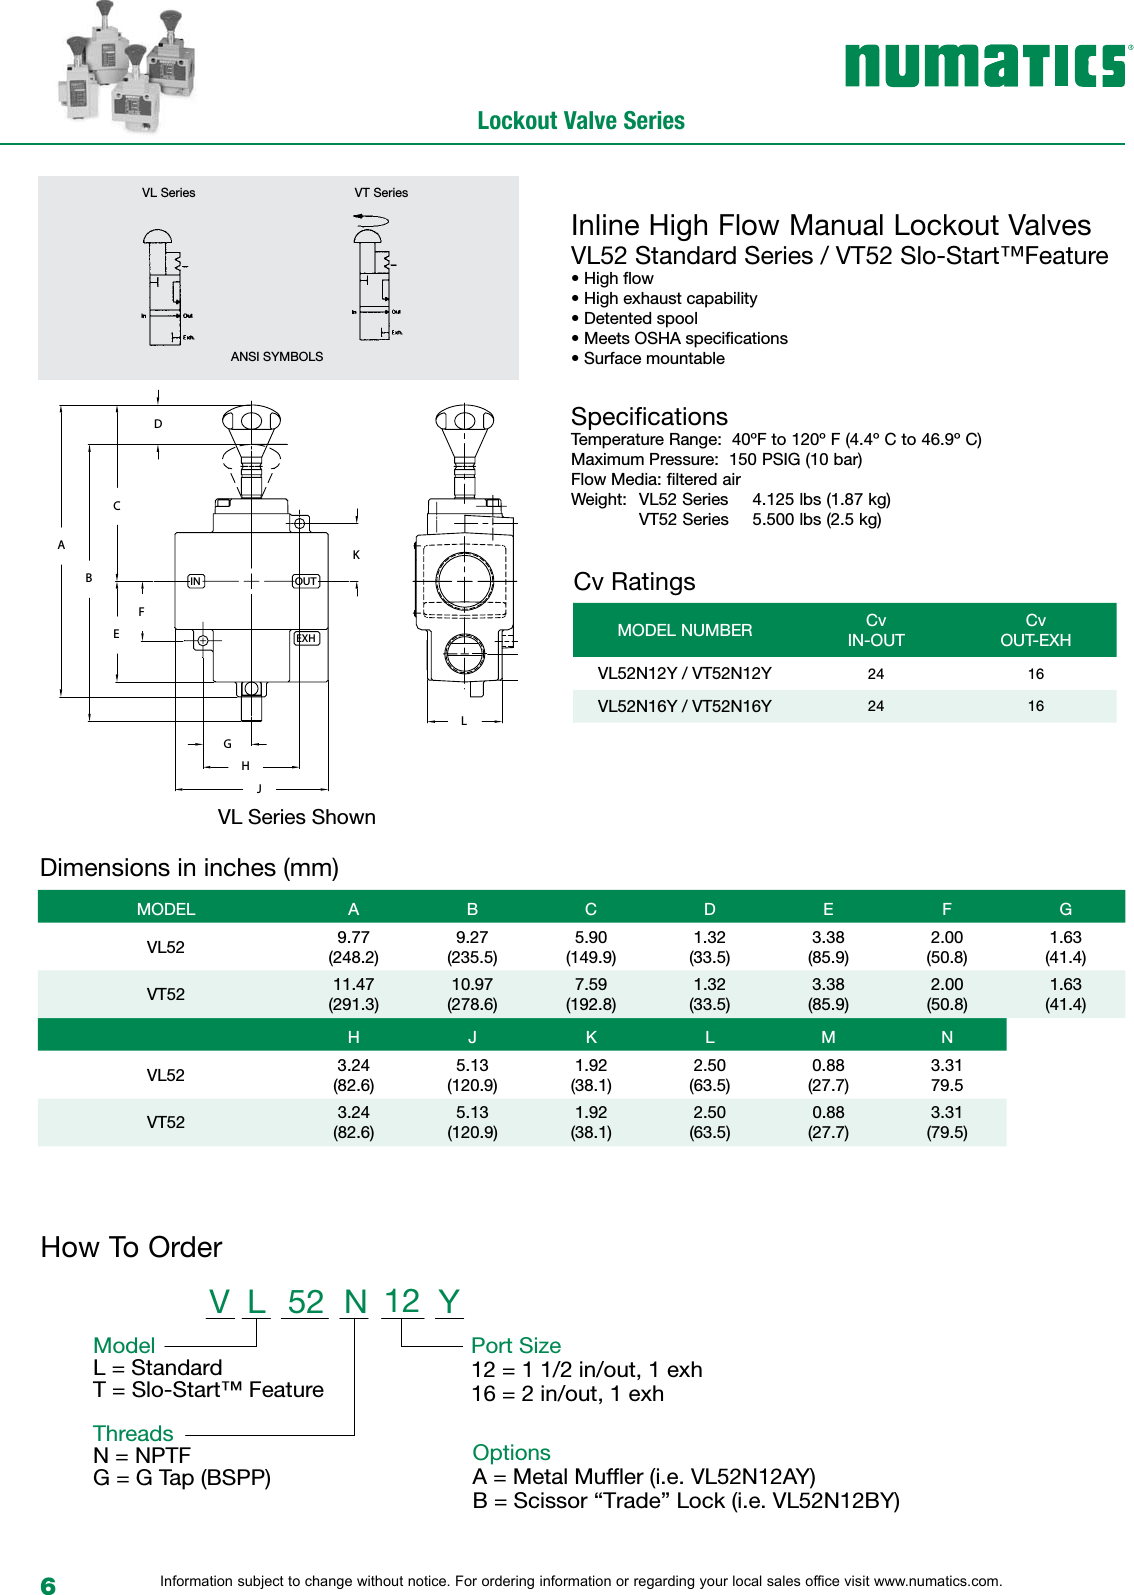 Page 8 of 12 - Flow Numatic Lockout Series-1505484633 User Manual